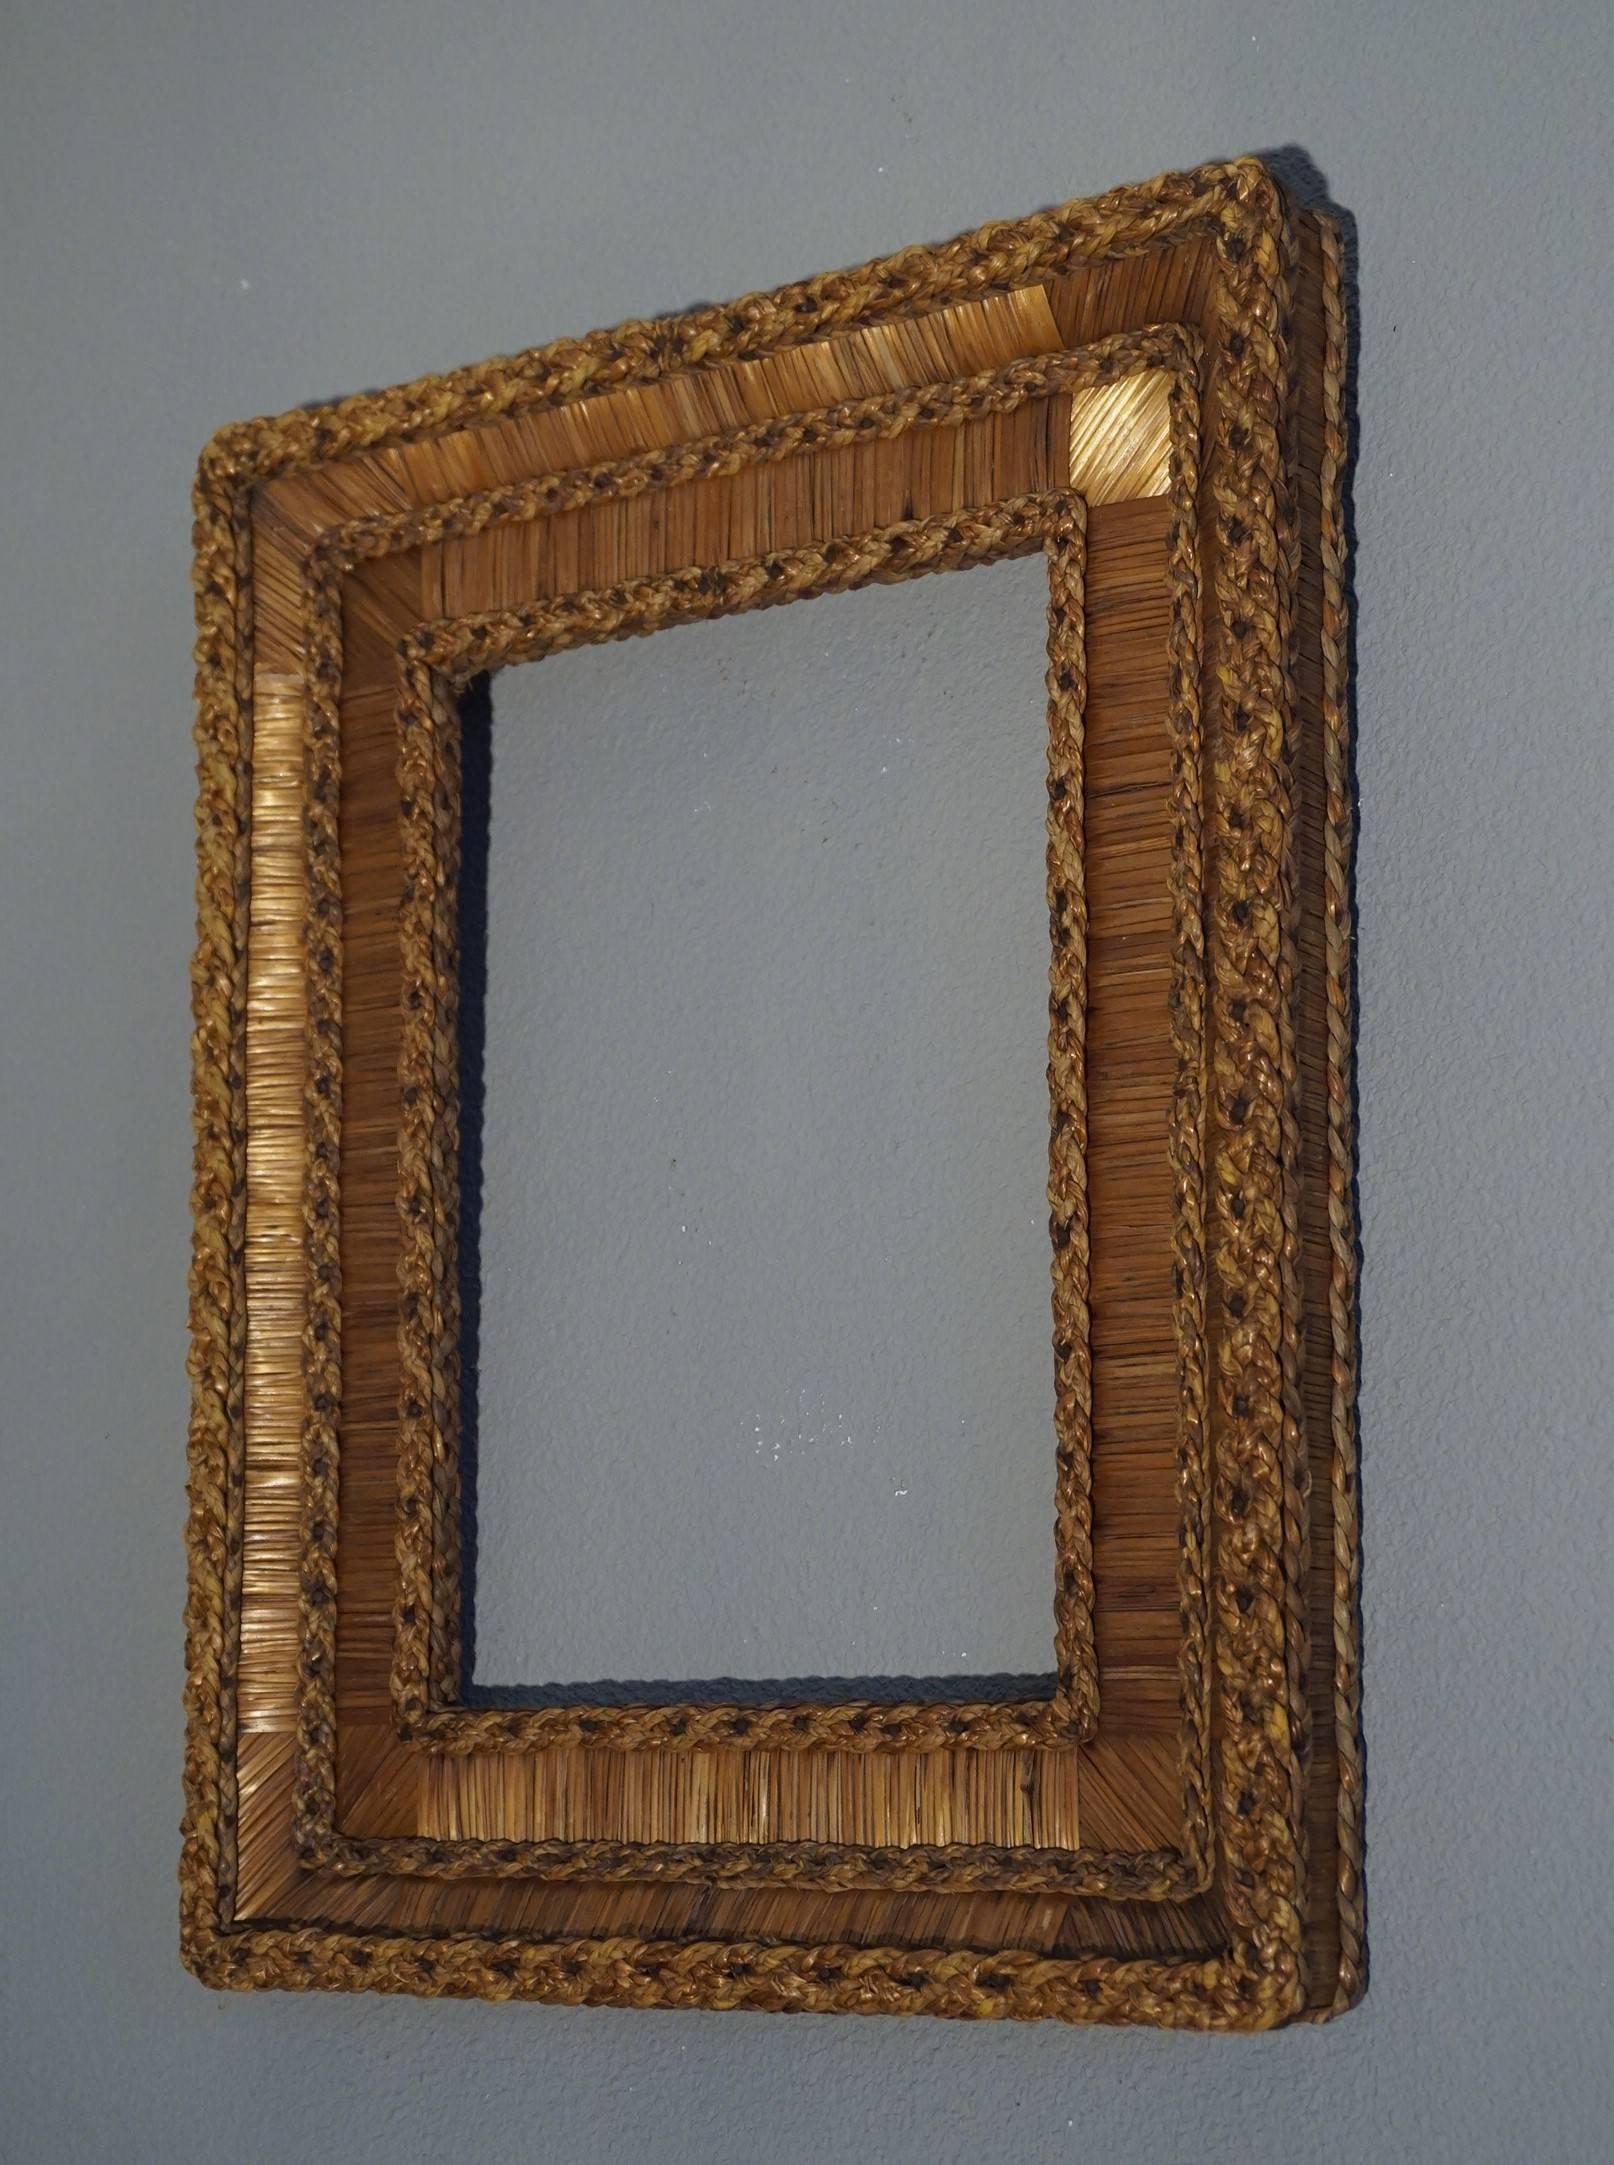 Rare and organically beautiful picture or mirror frame.

This unique picture frame is another one of our wonderful recent finds. For us, this rare and stylish frame ticks all the boxes:
1. because we cannot find another one anywhere on the worldwide